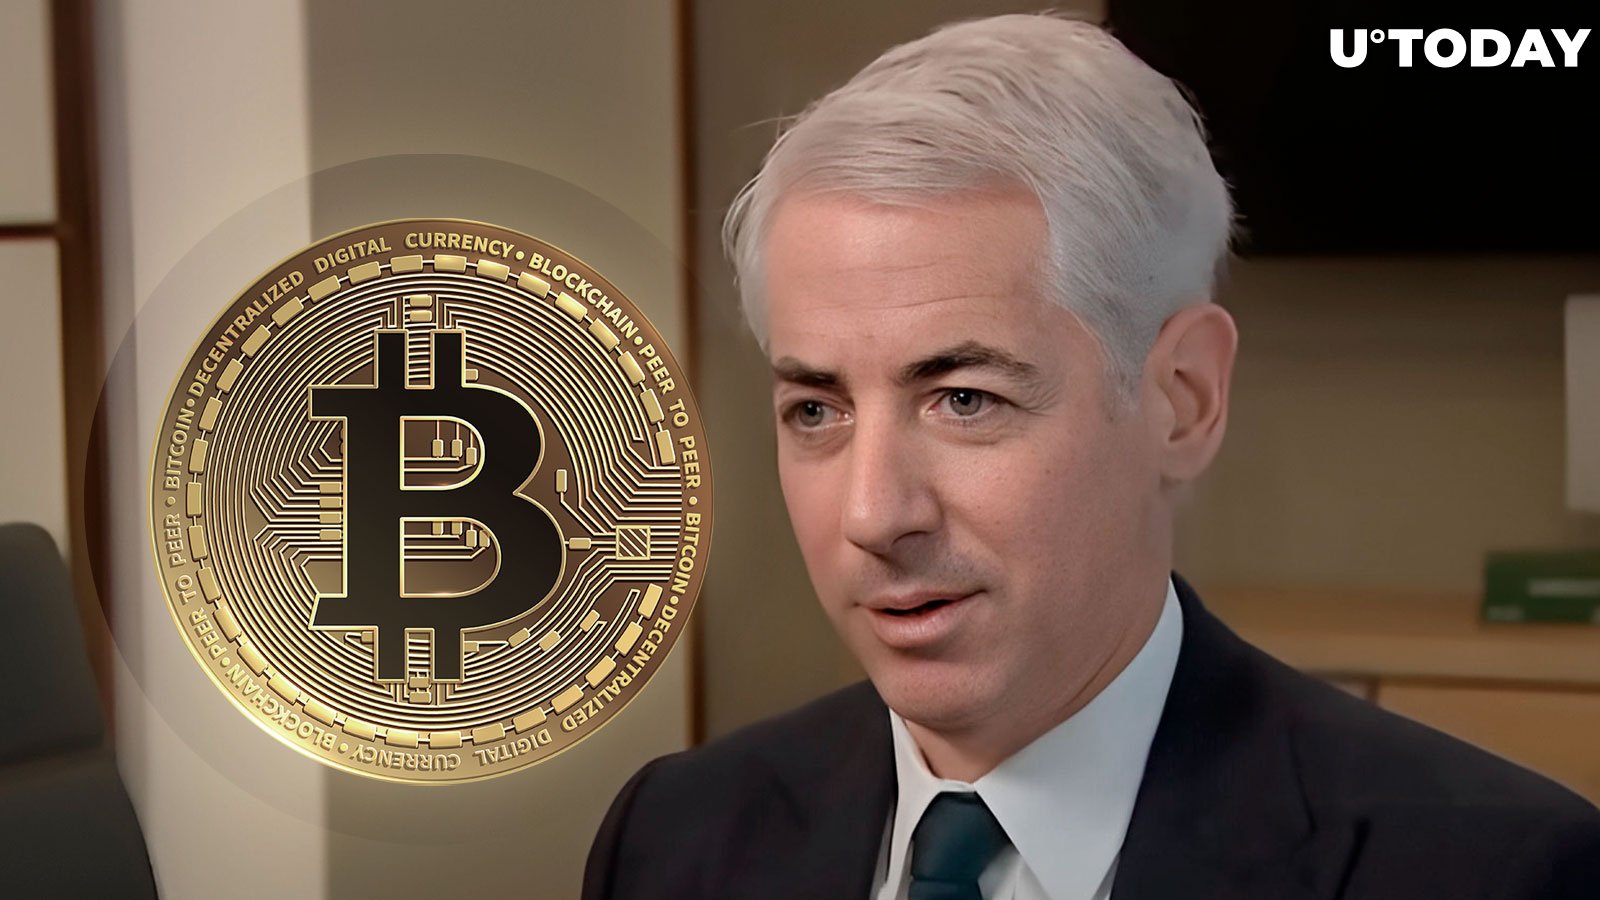 Legendary hedge fund manager Bill Ackman looks at Bitcoin and believes in its sky-high potential